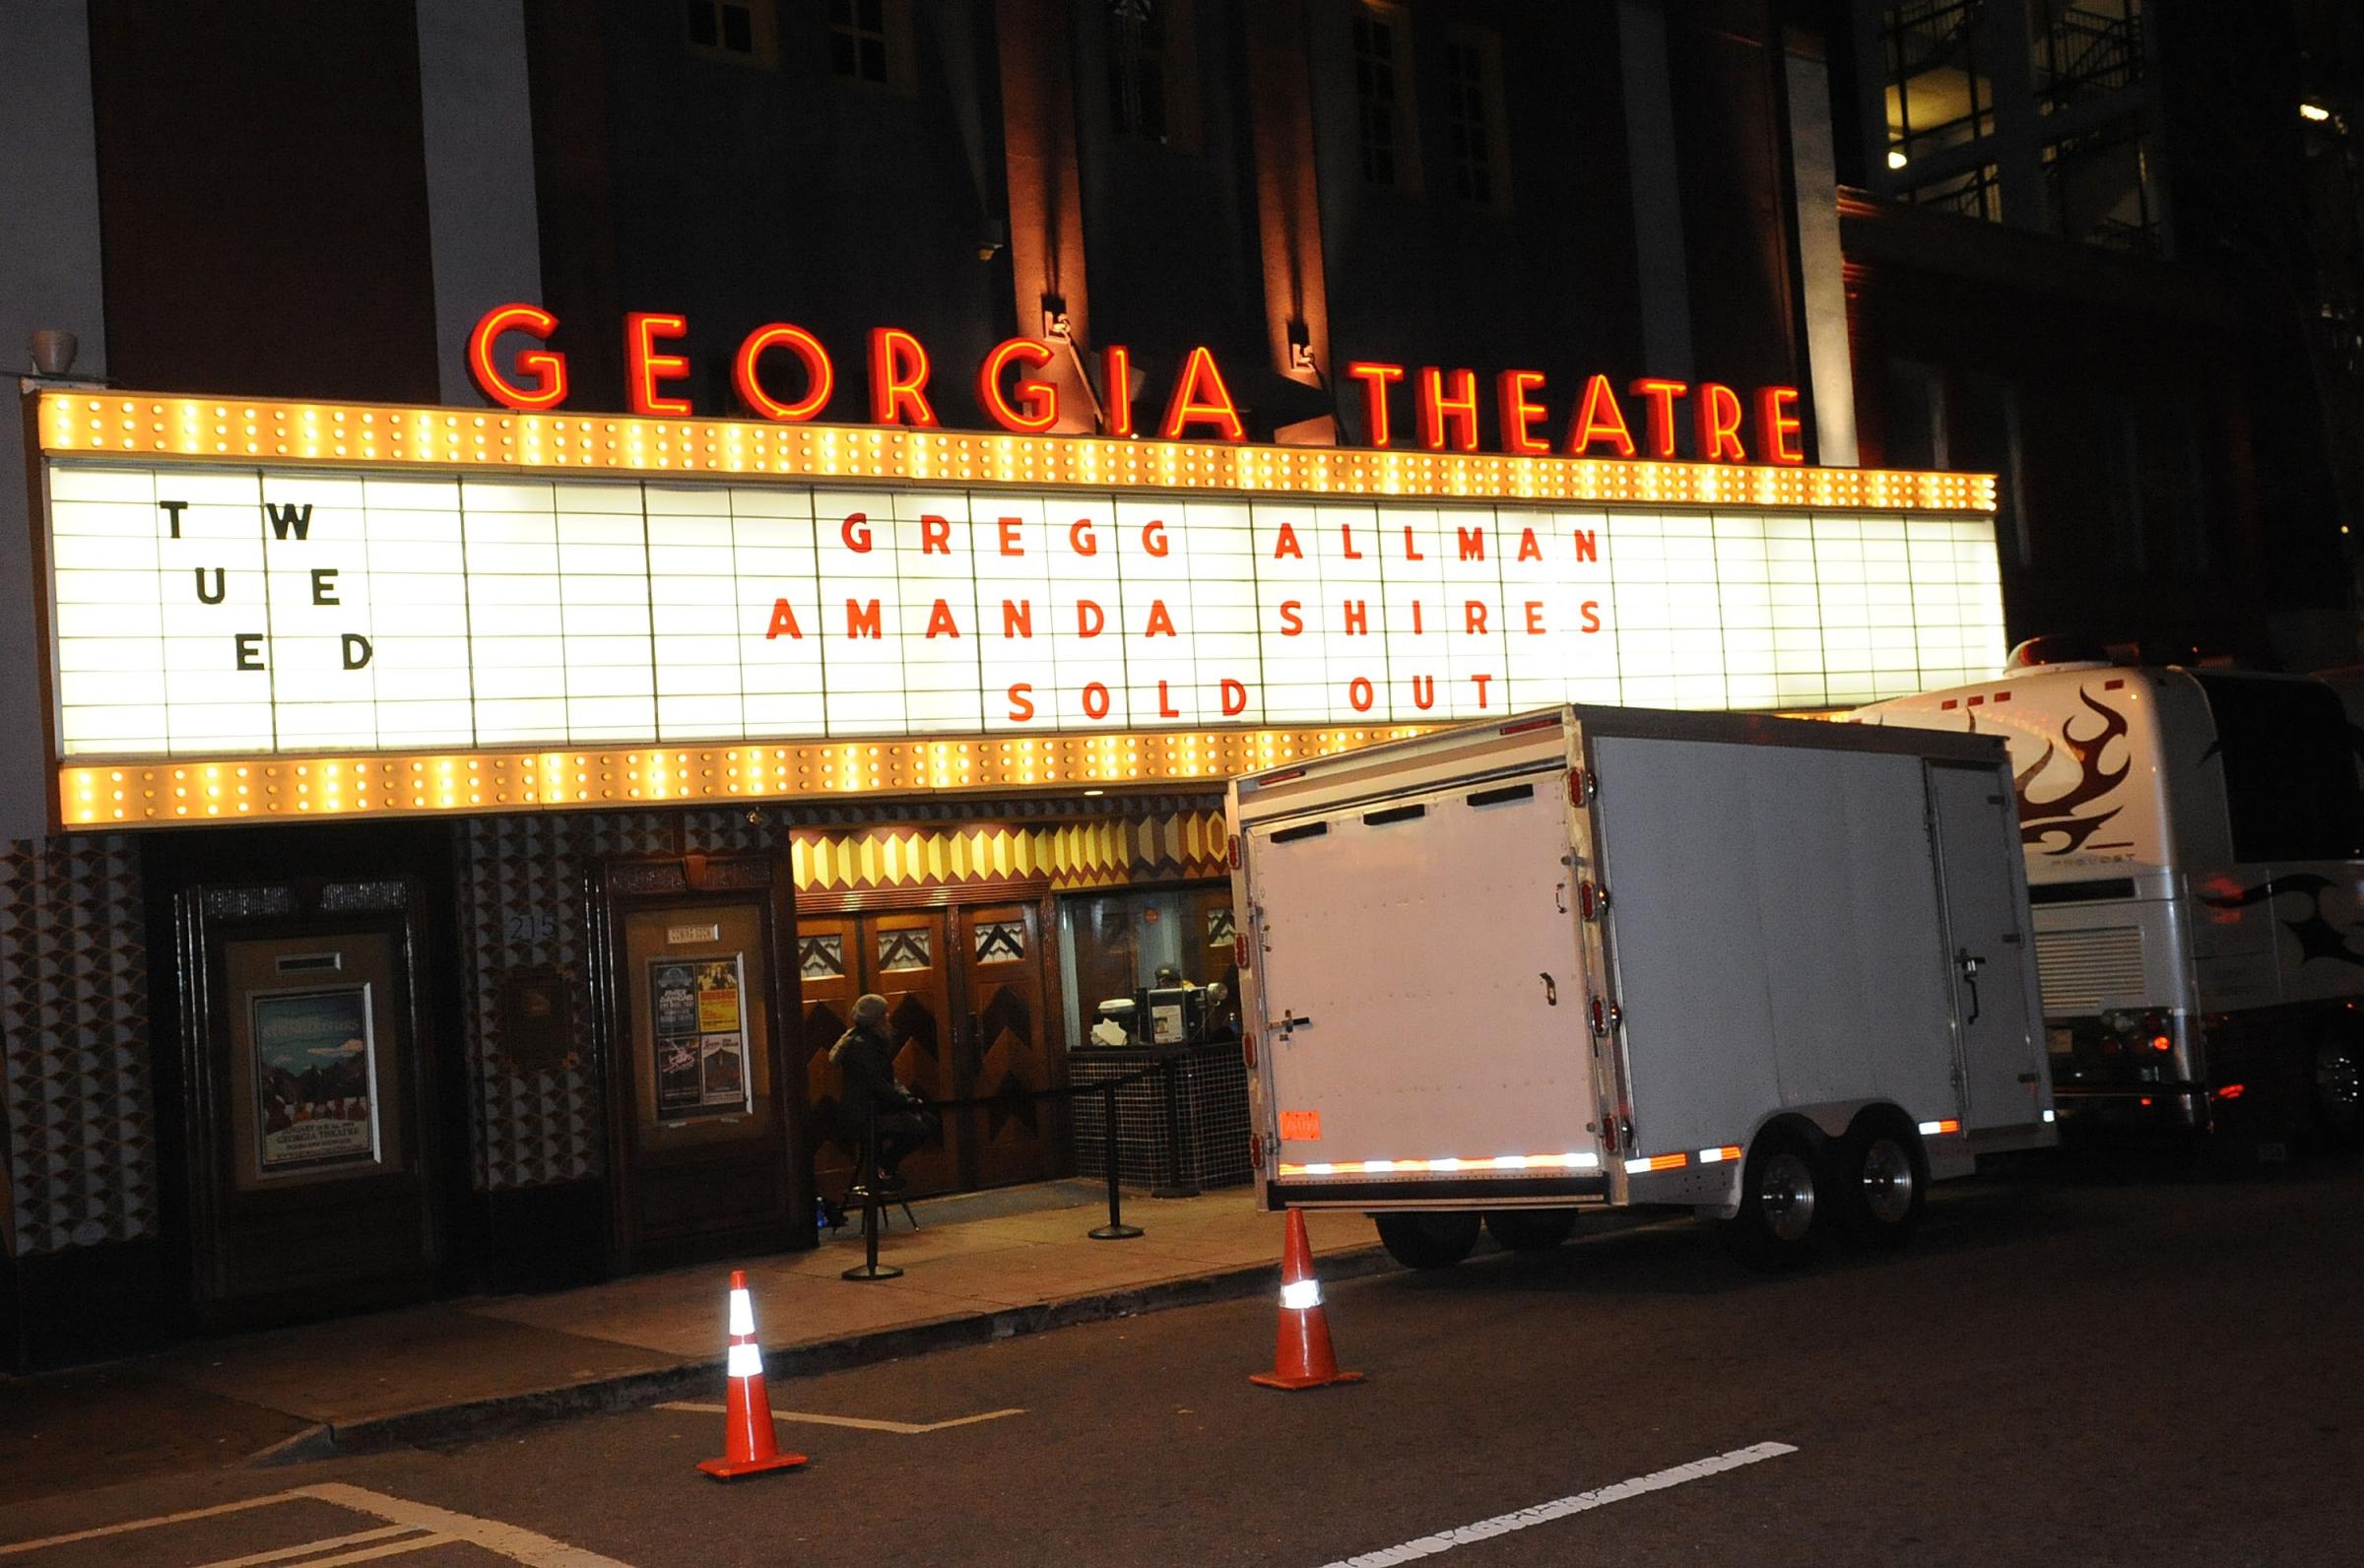 General atmosphere during the Gregg Allman concert at Georgia Theatre in Athens, Ga. on Jan. 6, 2015.